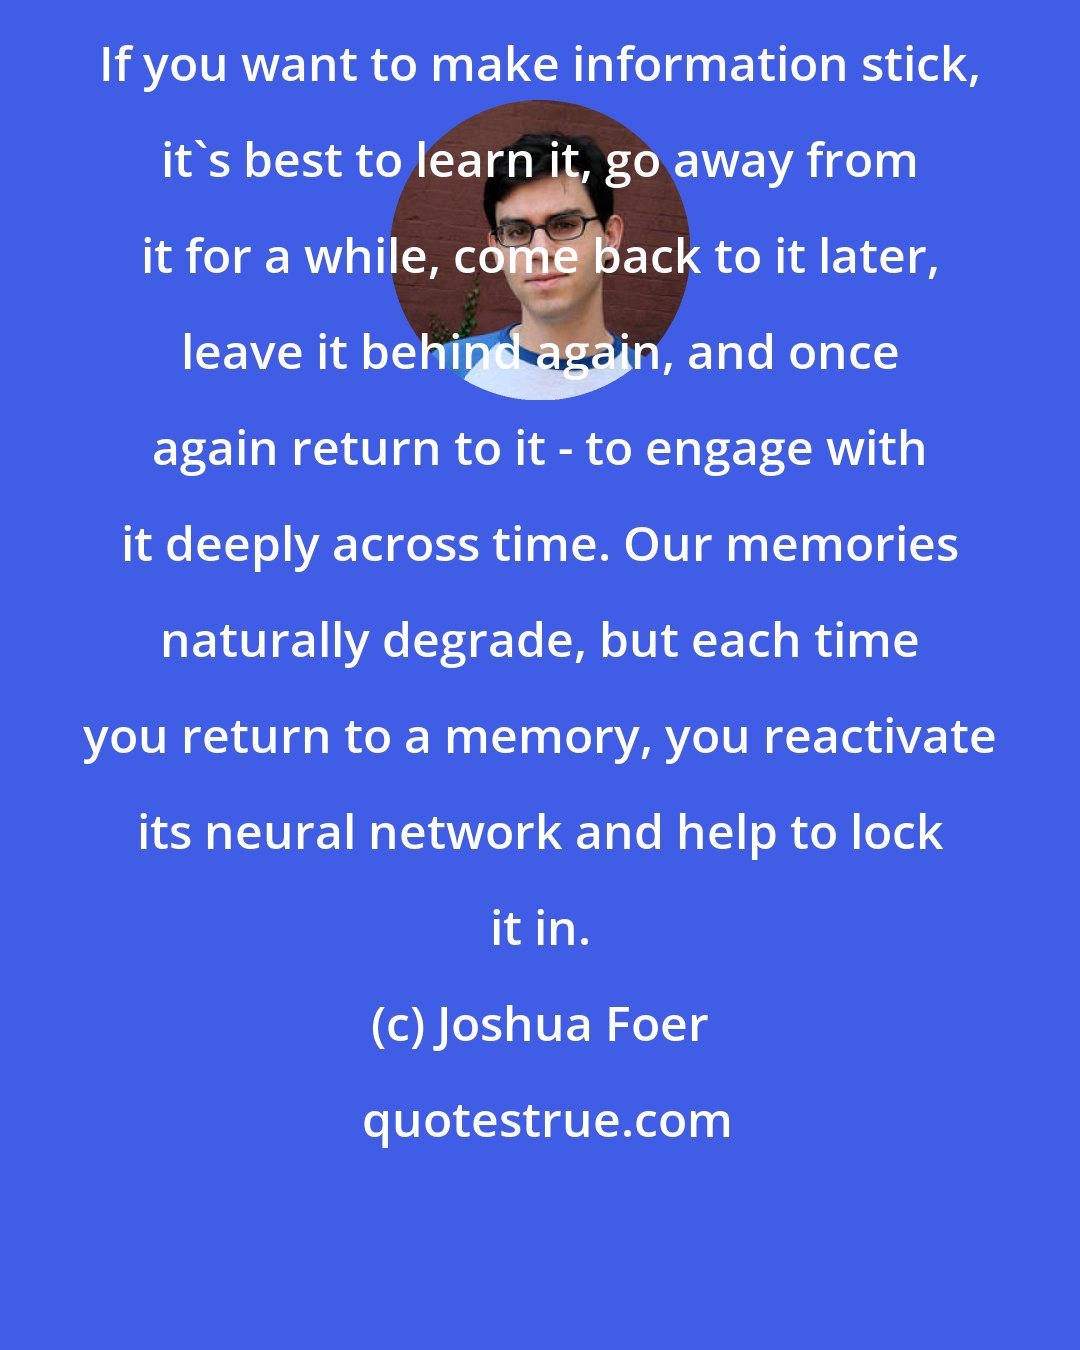 Joshua Foer: If you want to make information stick, it's best to learn it, go away from it for a while, come back to it later, leave it behind again, and once again return to it - to engage with it deeply across time. Our memories naturally degrade, but each time you return to a memory, you reactivate its neural network and help to lock it in.